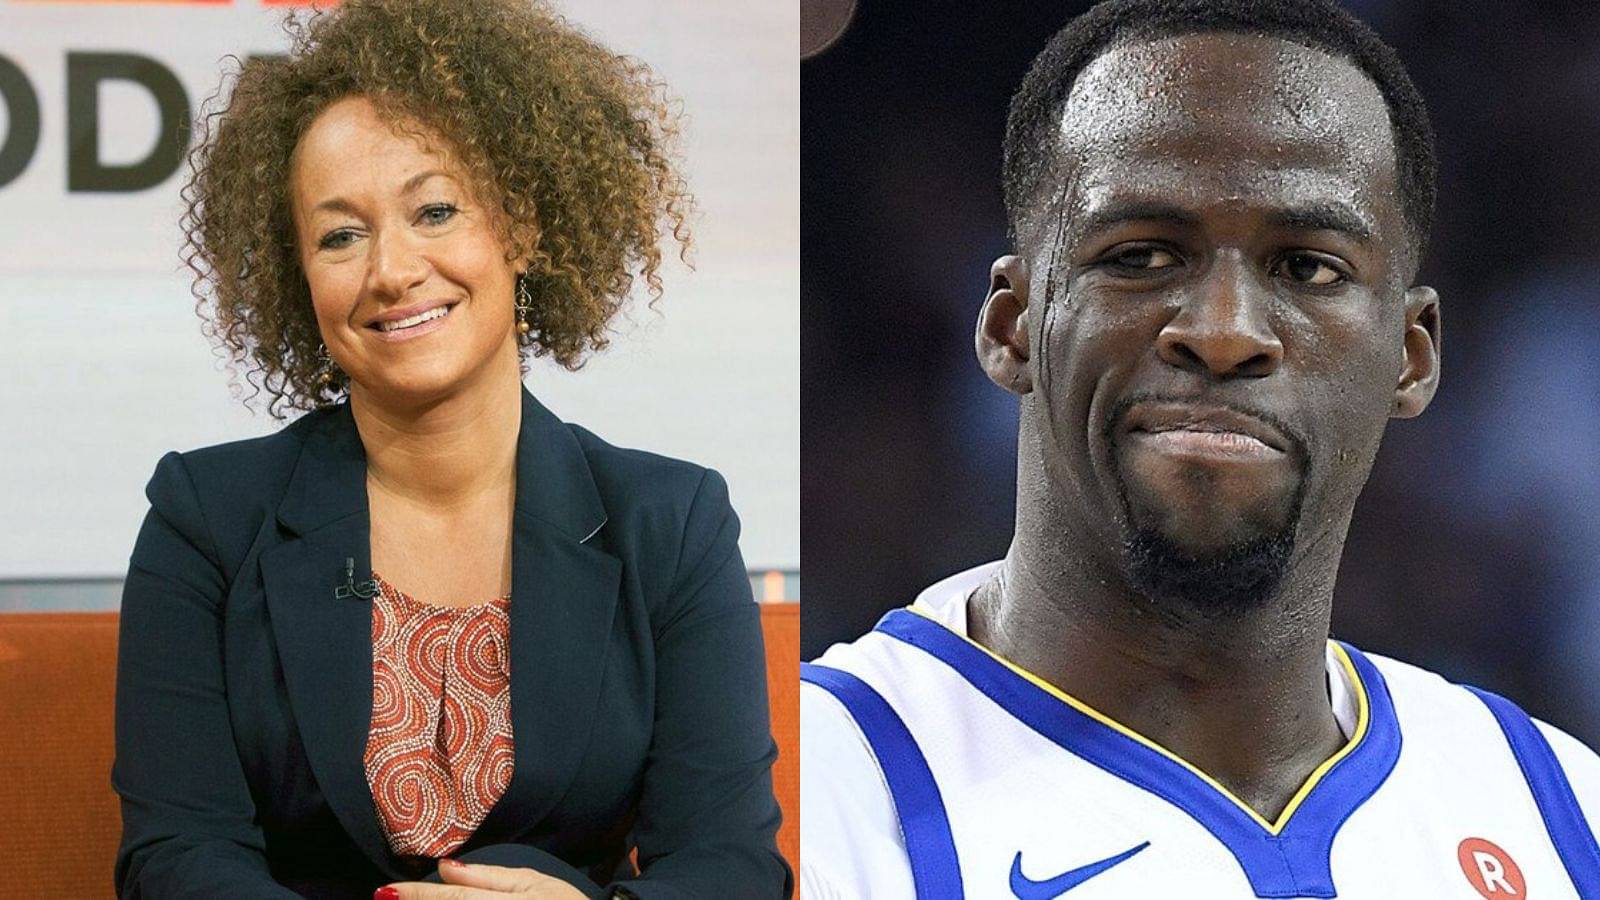 "B*tch, change your name to Draymond Green": $60M comedian trolled activist Rachel Dolezal and Warriors star